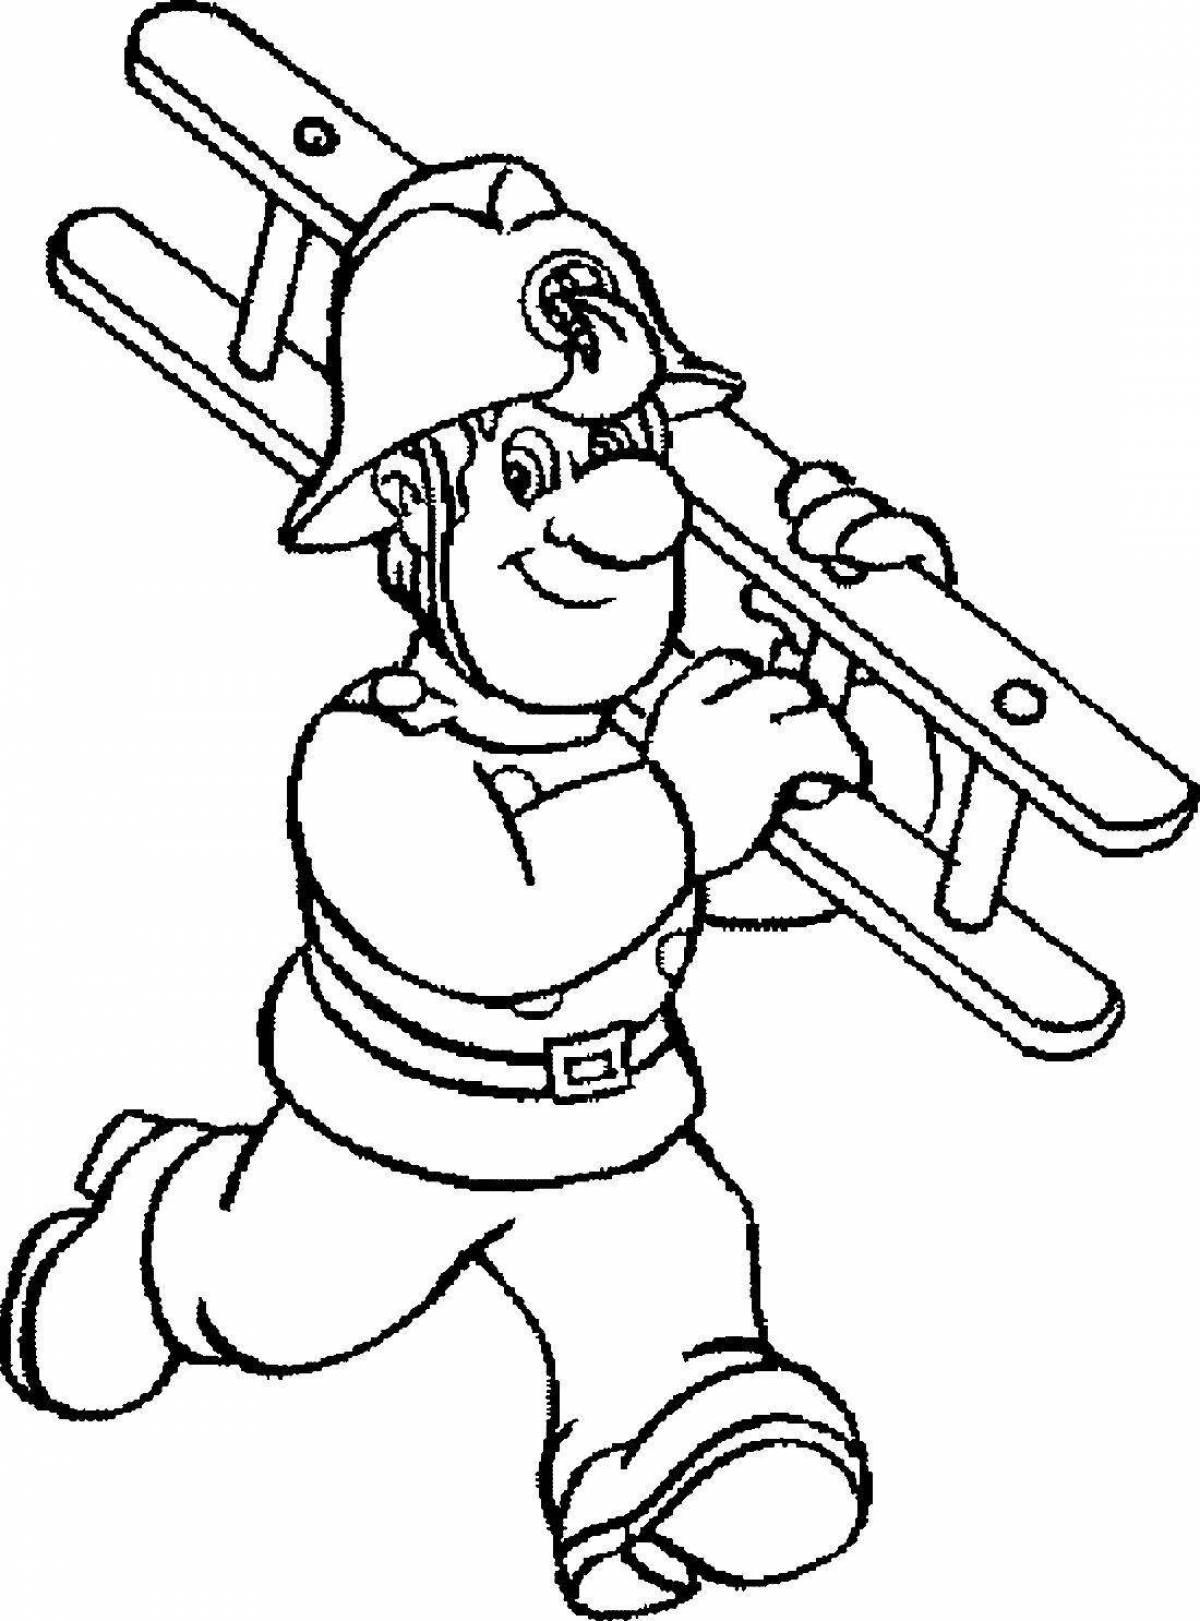 Large drawing of a fireman